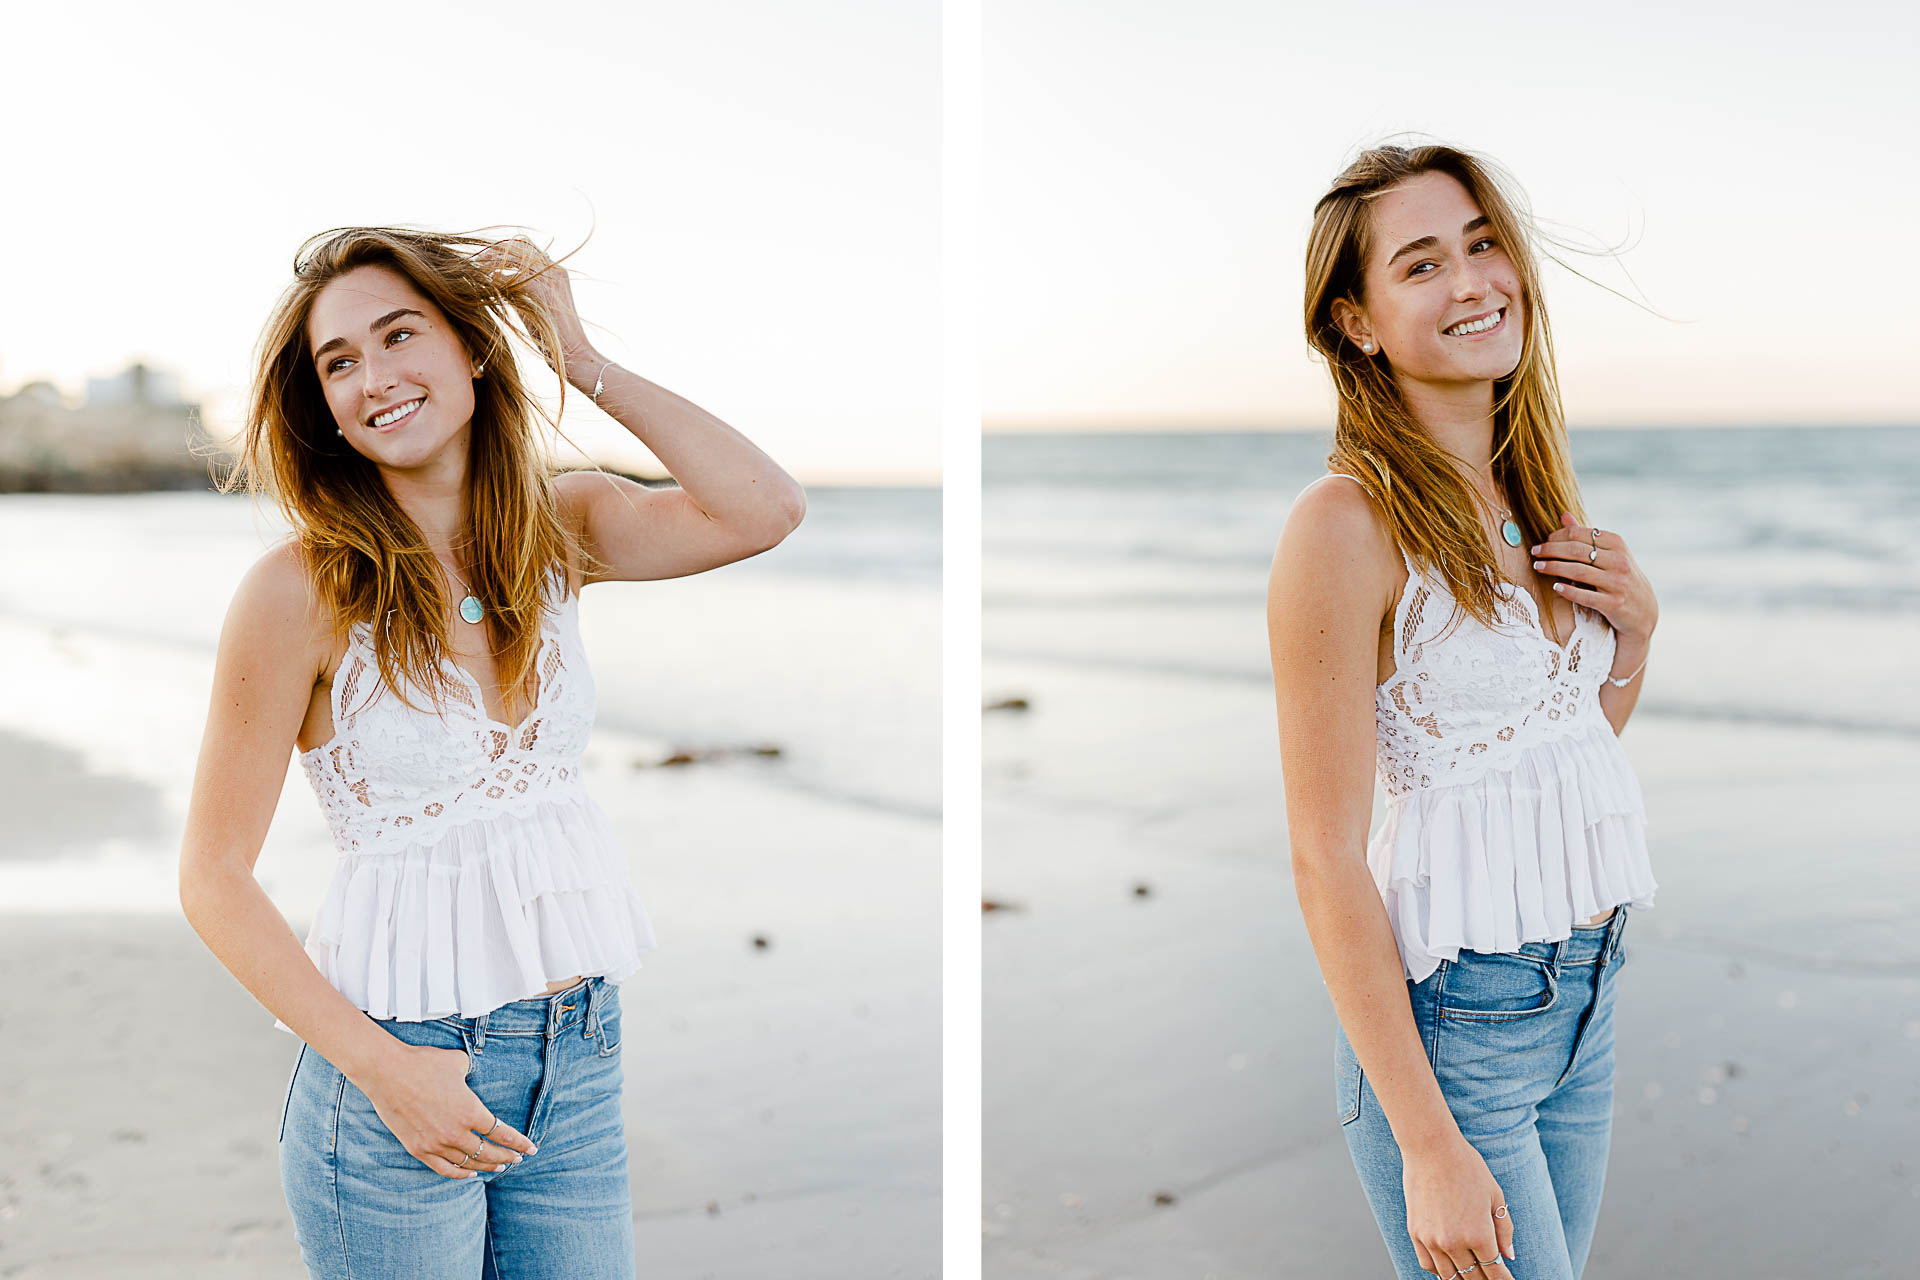 Photo by Scituate Senior Portrait Photographer Christina Runnals | Girl standing on the beach running her fingers through her hair